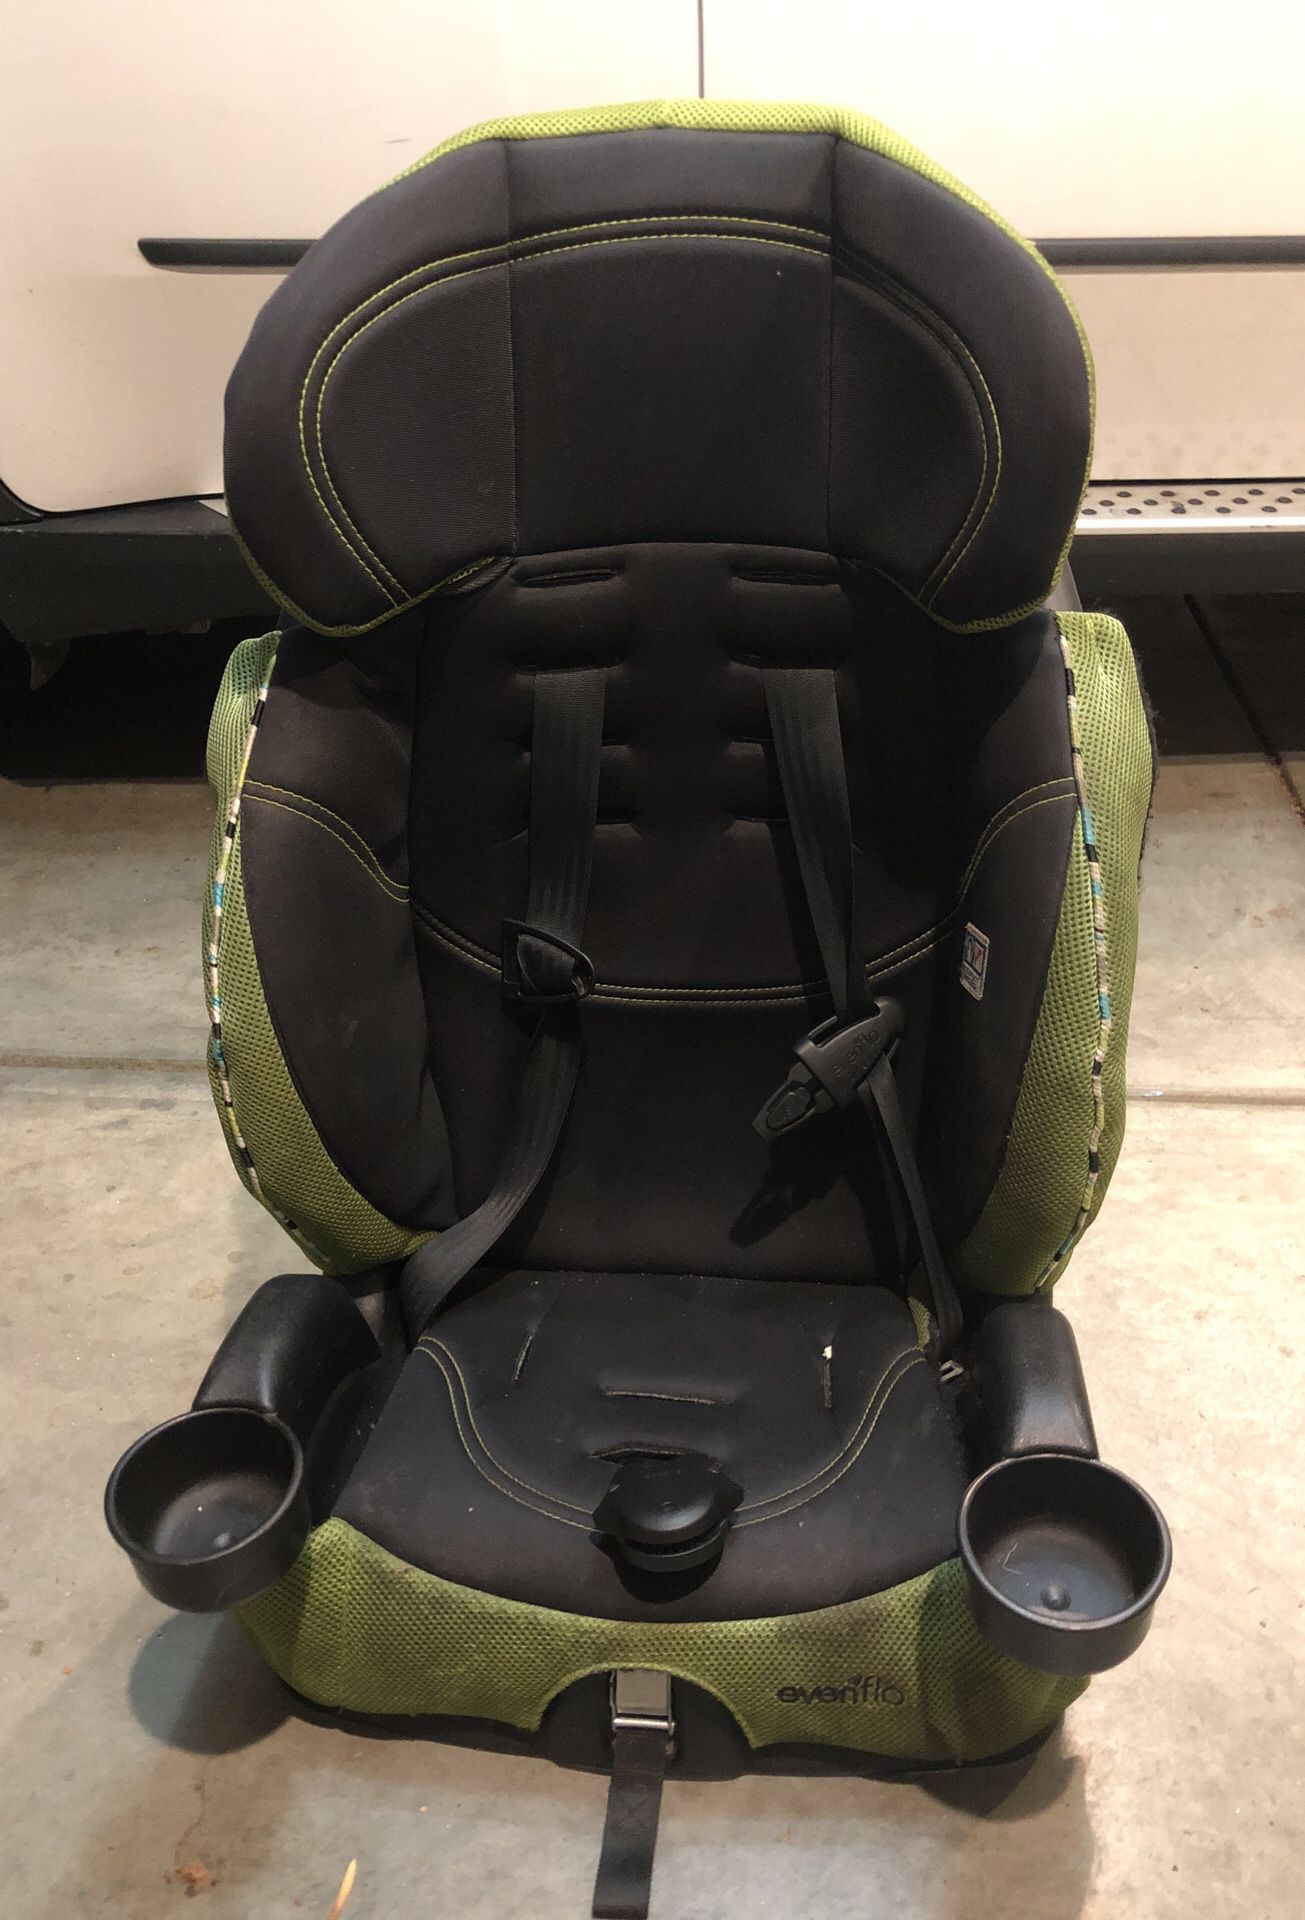 Evenflo car seat /booster seat